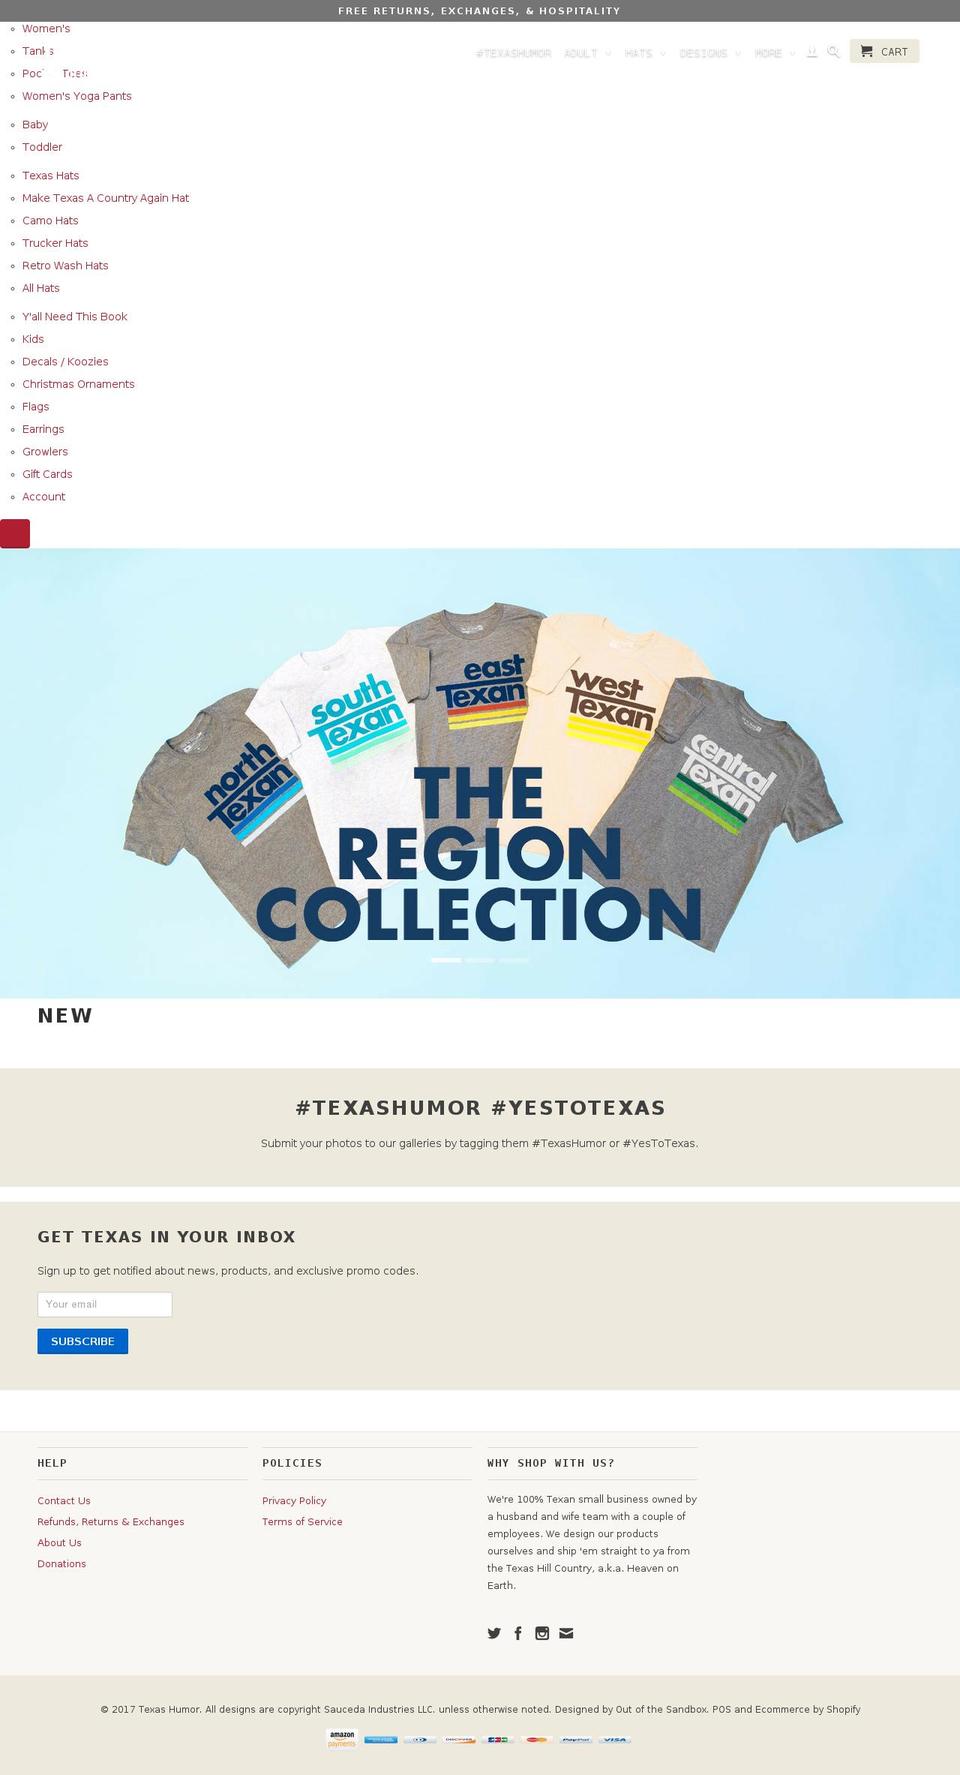 Be Yours Shopify theme site example texashumor.com